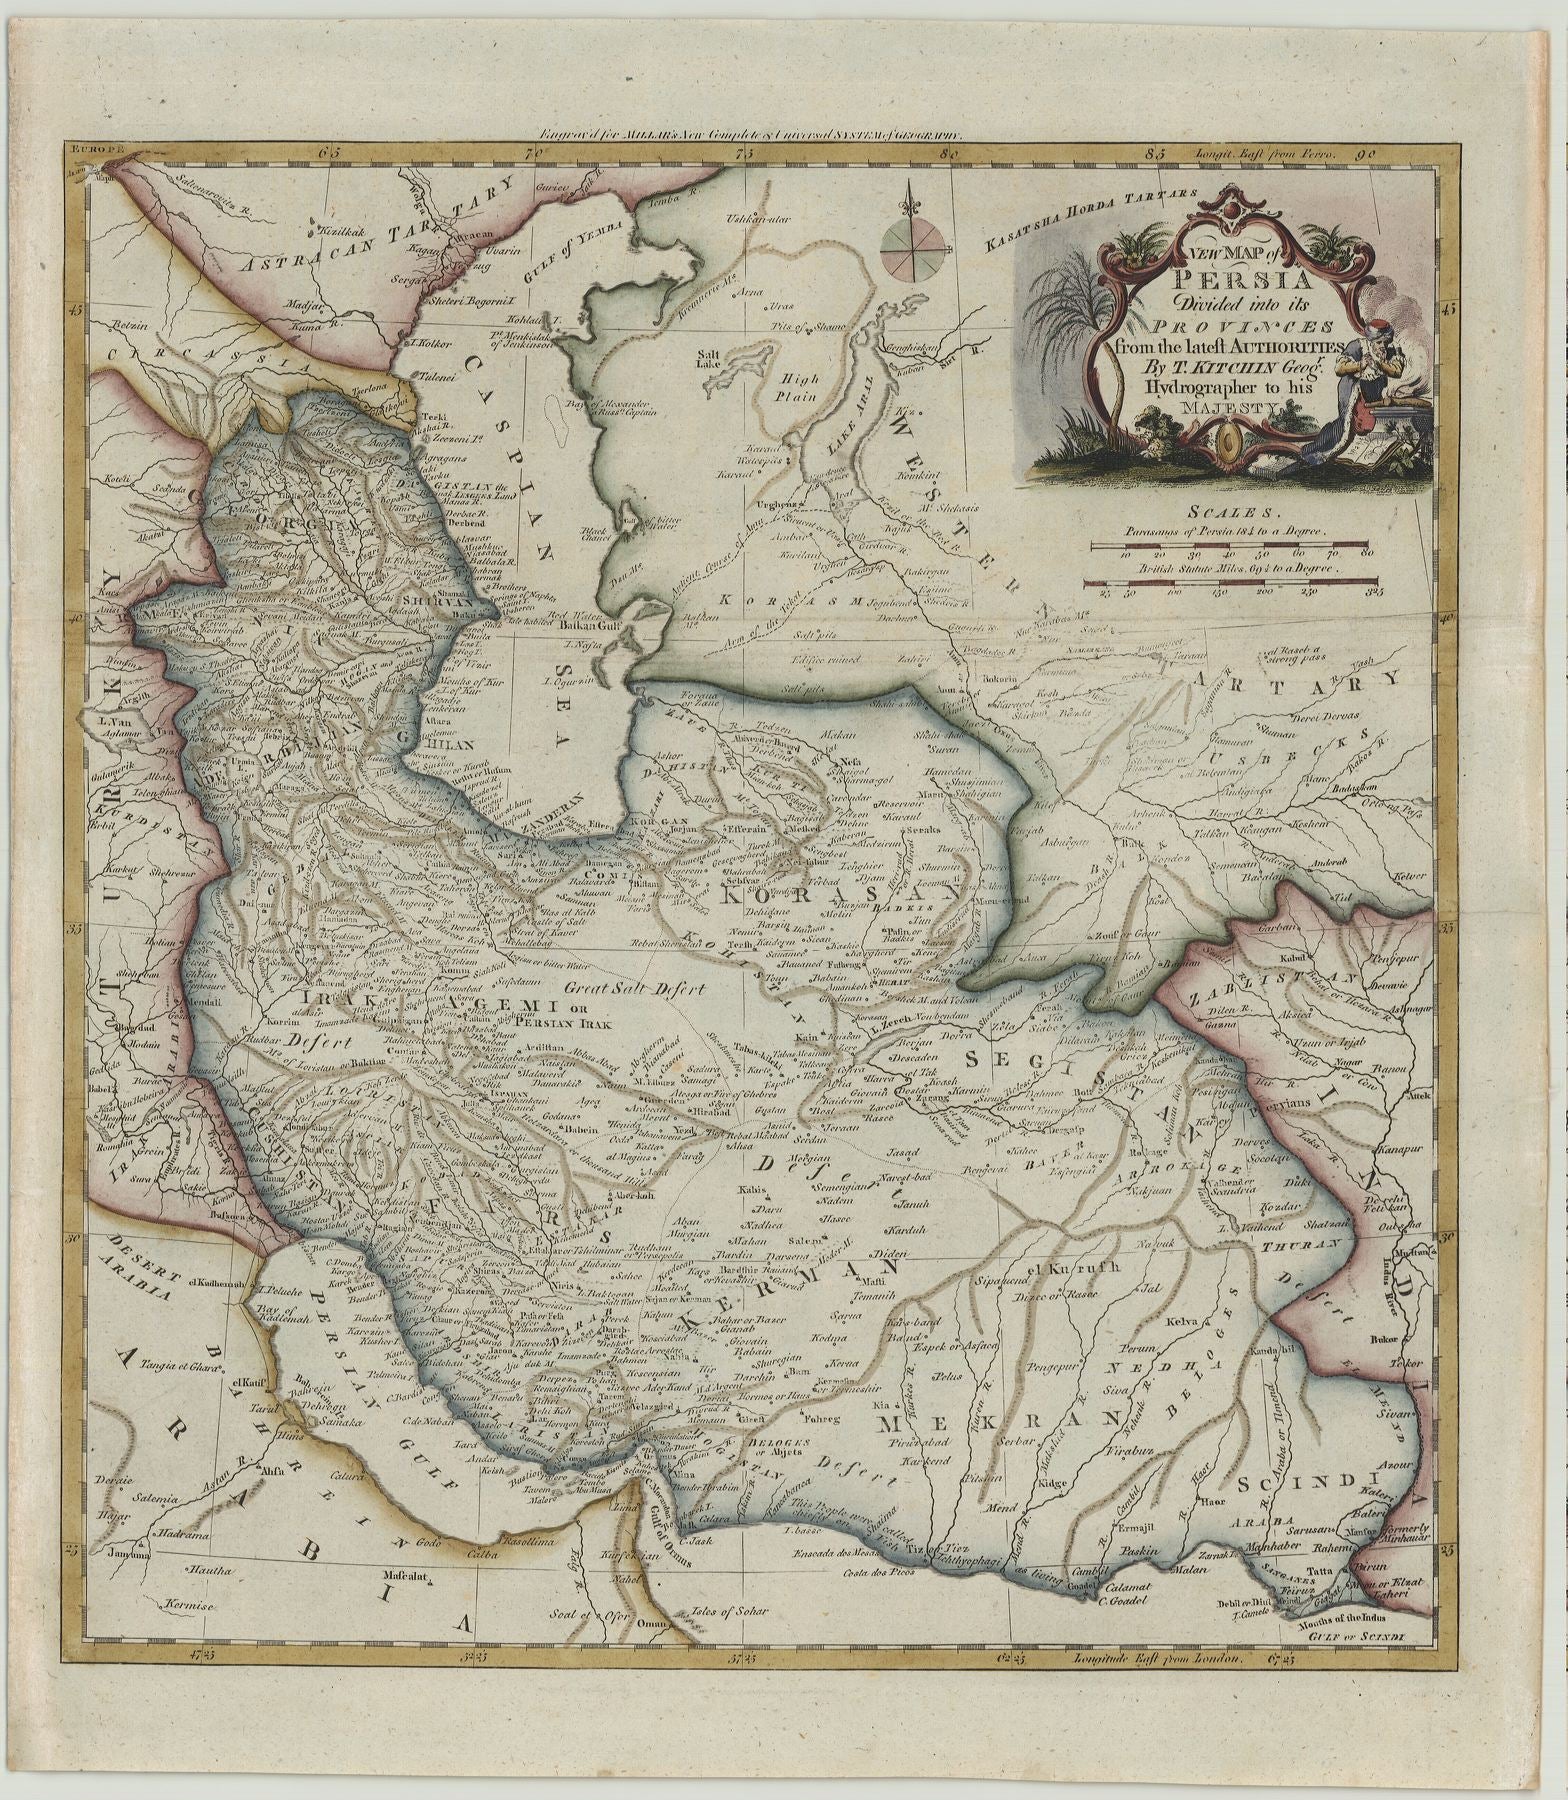 R2687  Kitchin, Thomas: New Map of Persia Divided into ist Provinces from the Latest Authorities. 1782